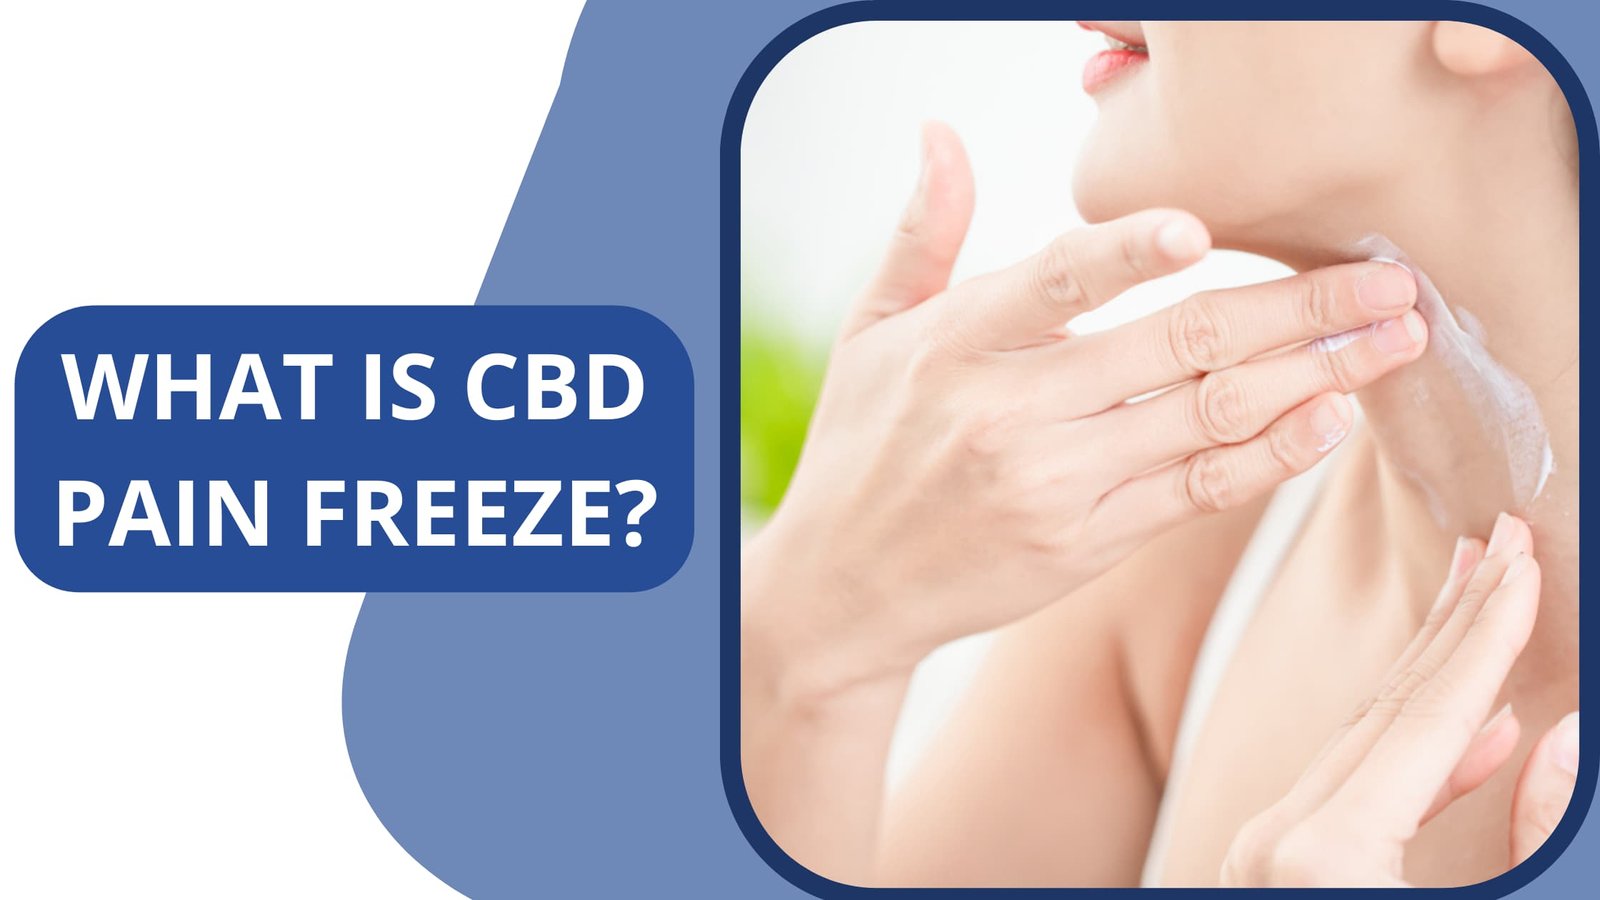 What Is CBD Pain Freeze